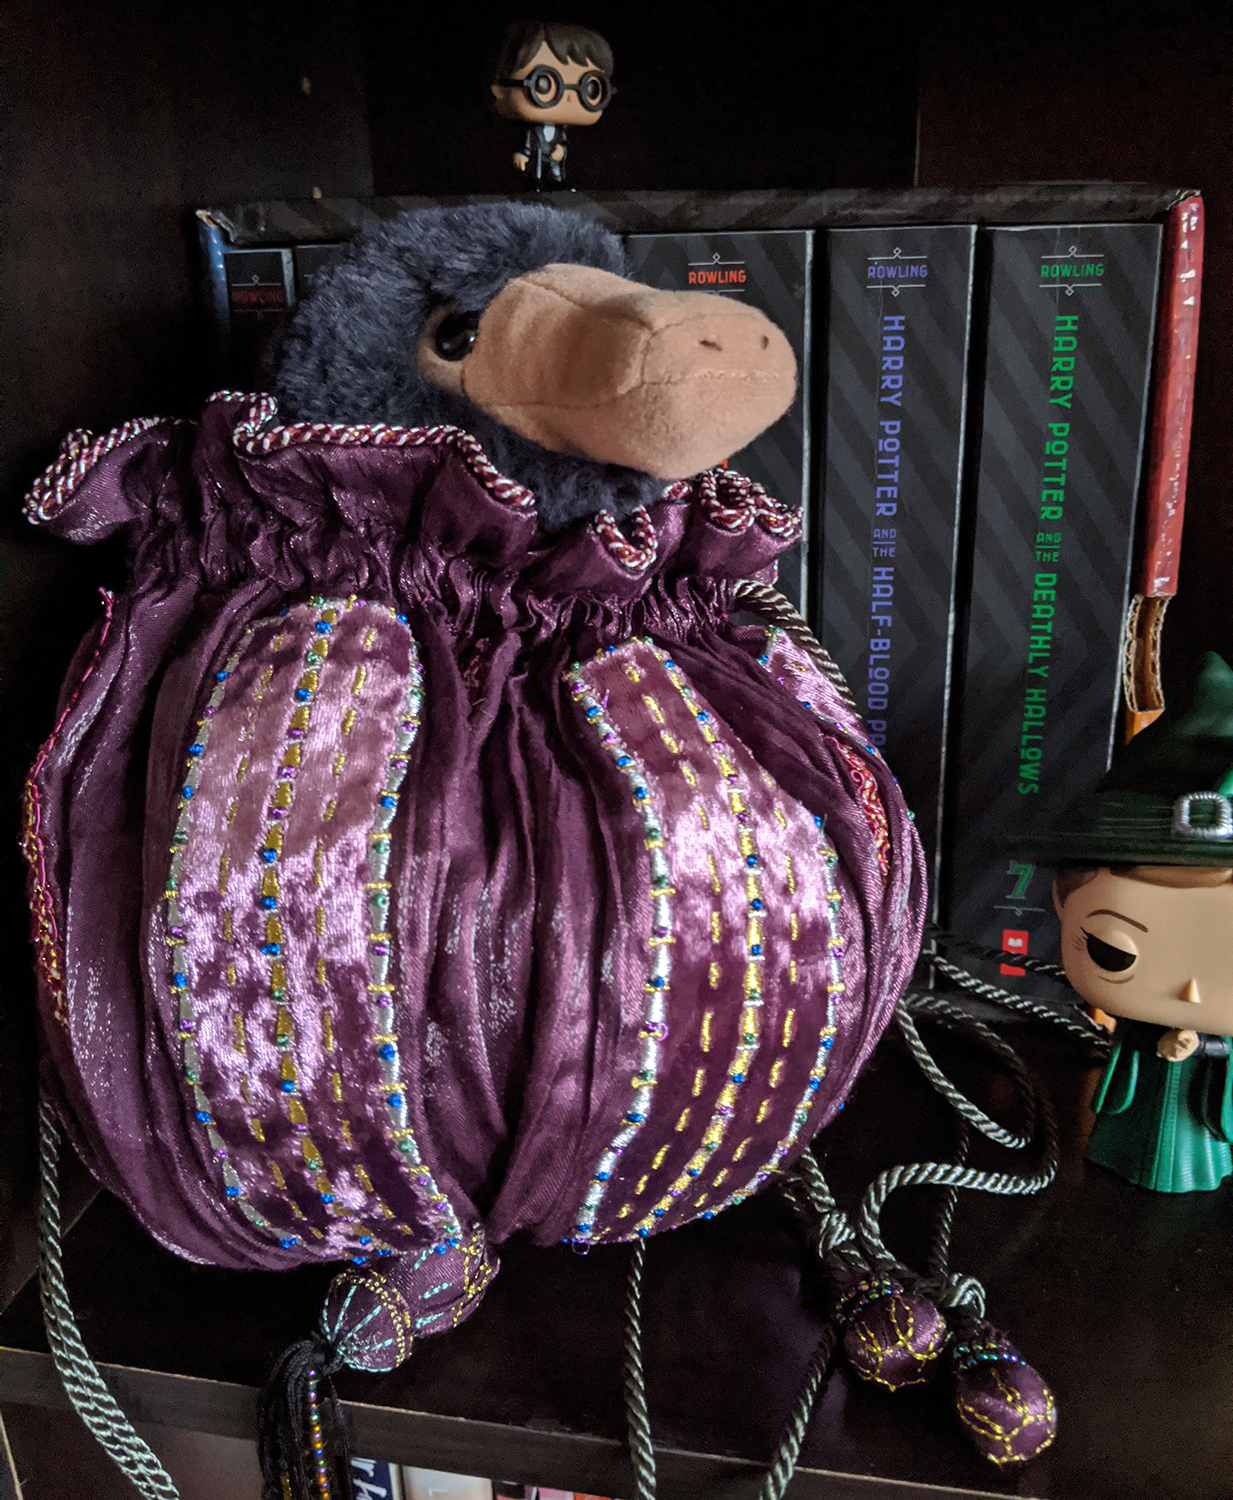 Hermione’s bag with Niffler inside